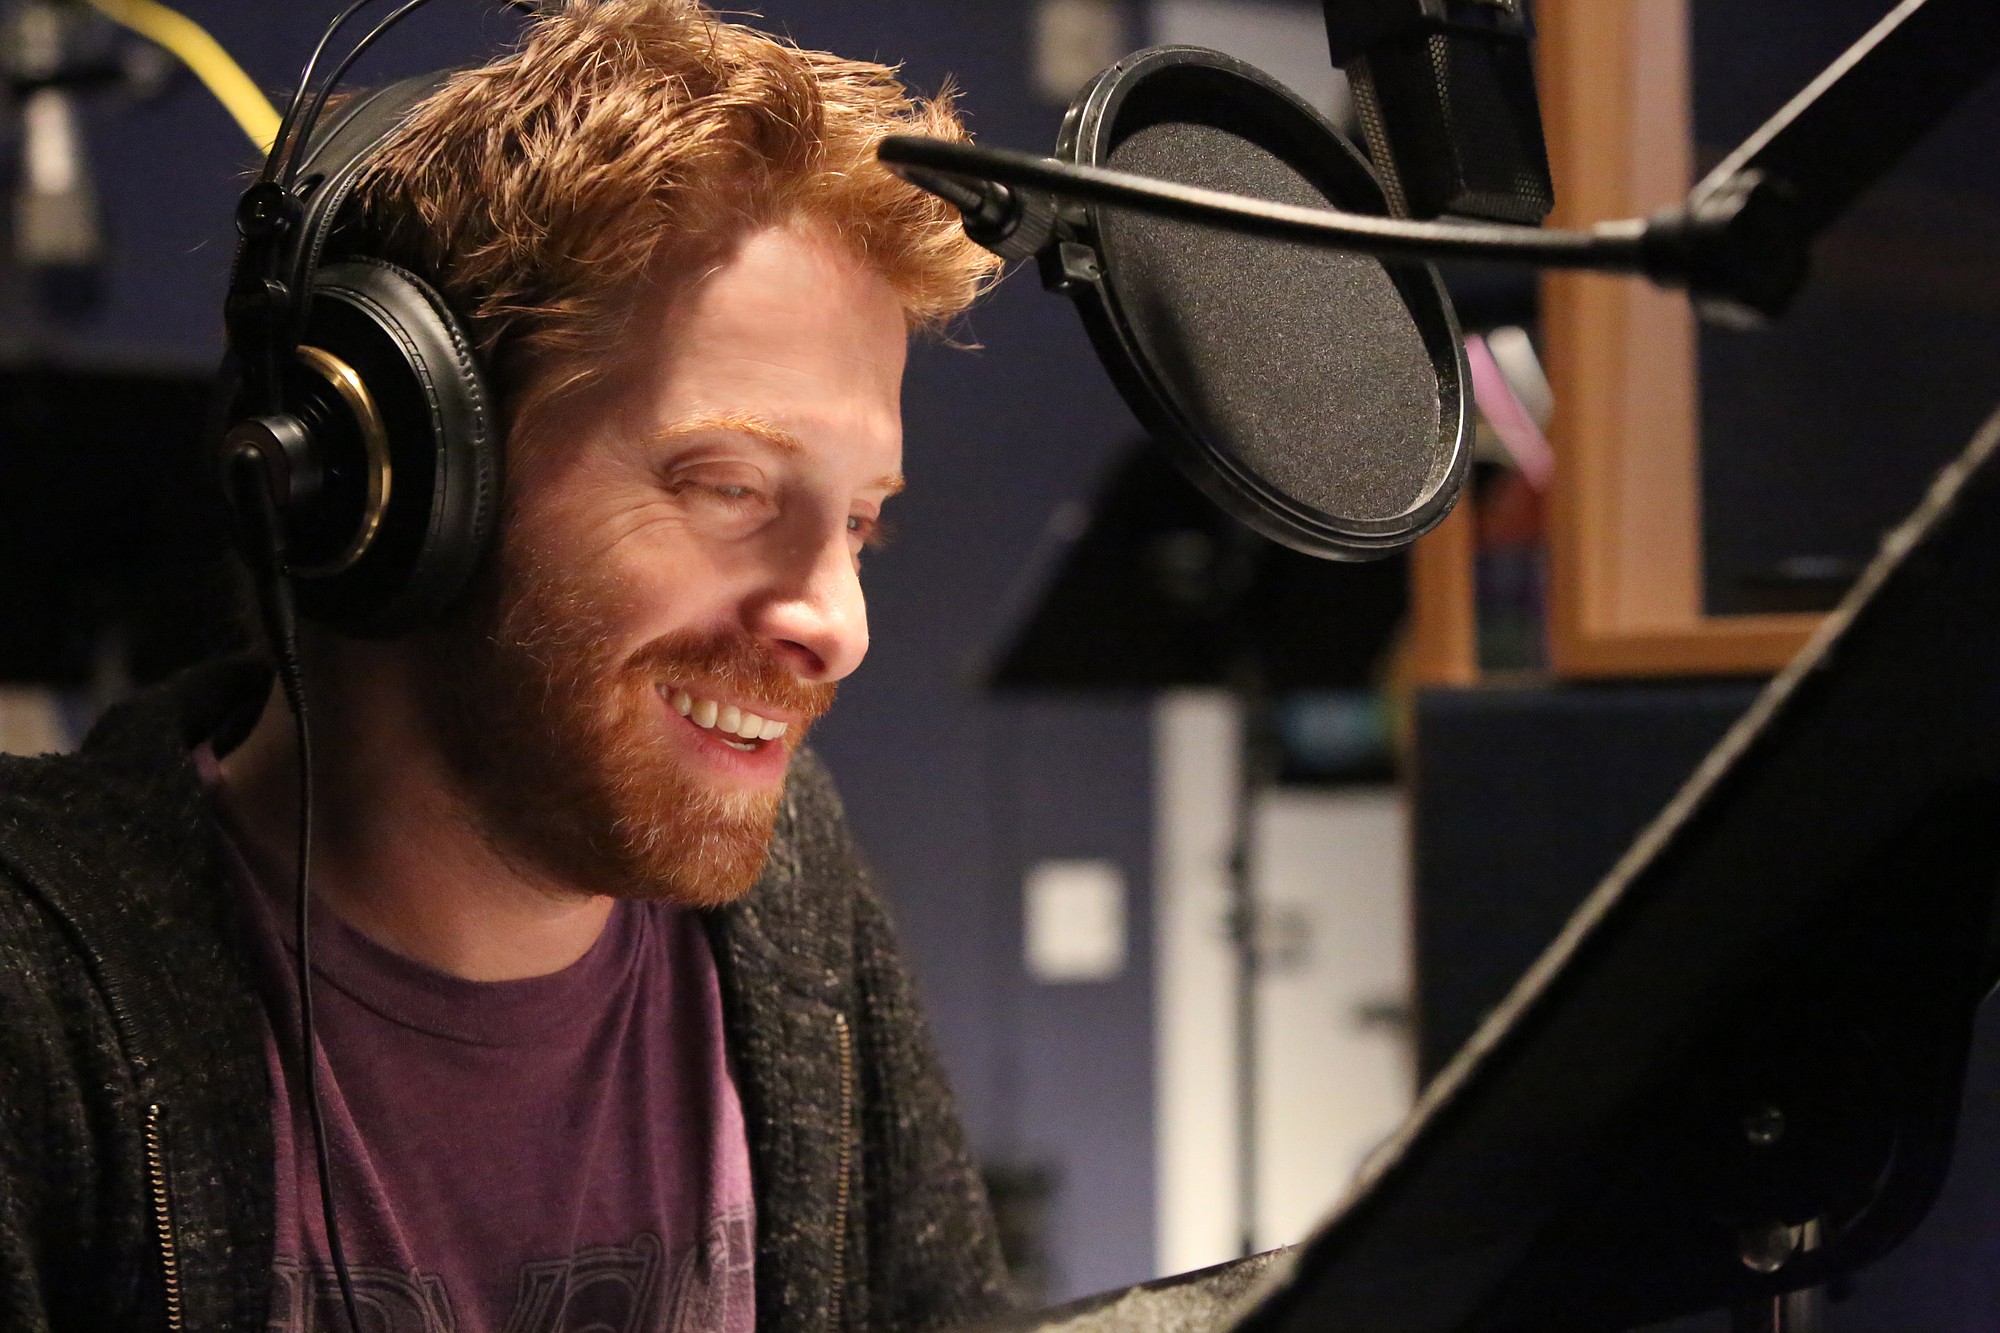 Seth Green
Voices Leonardo, leader of this quartet of &quot;heroes in a half shell&quot;